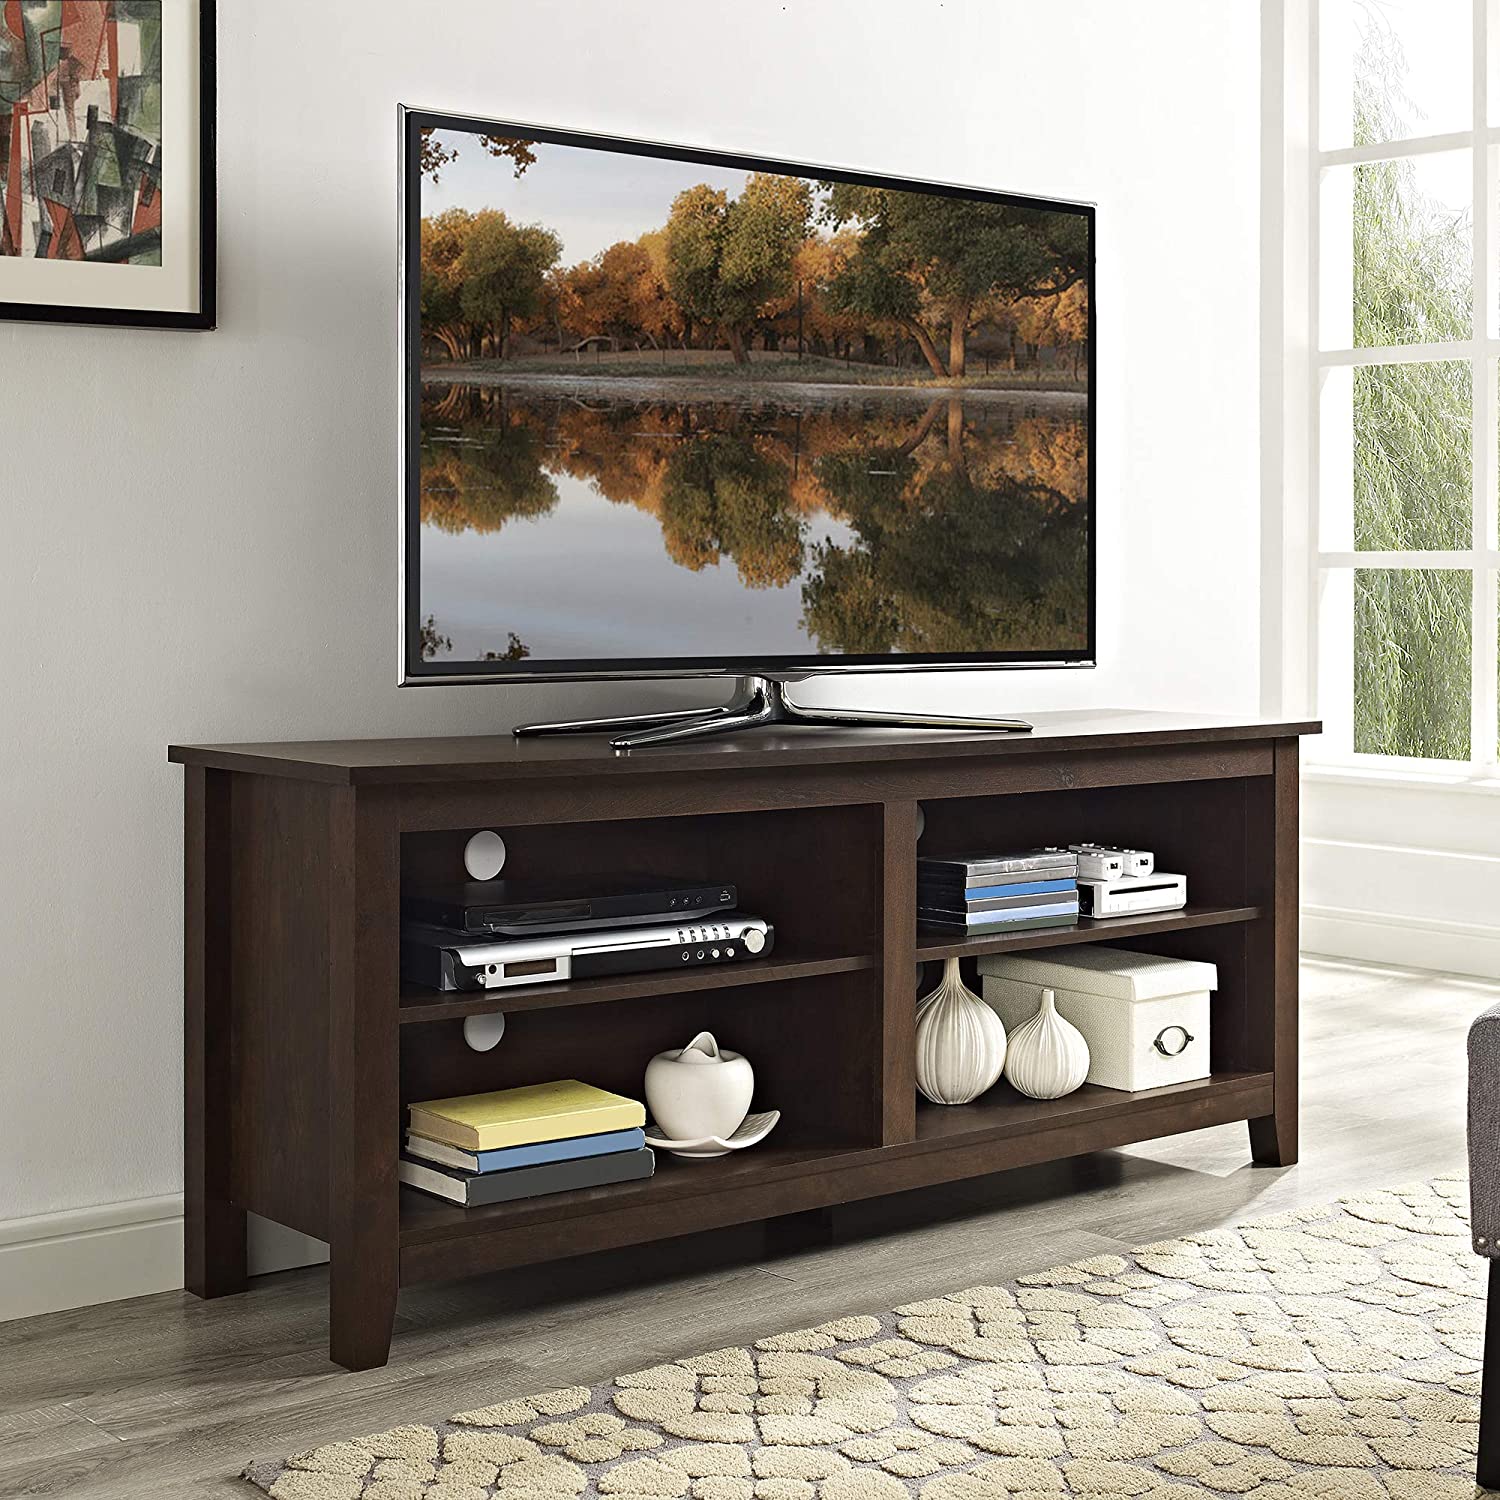 Walker Edison Wren Classic 4 Cubby TV Stand for TVs up to 65 Inches, 58 Inch, Brown $115